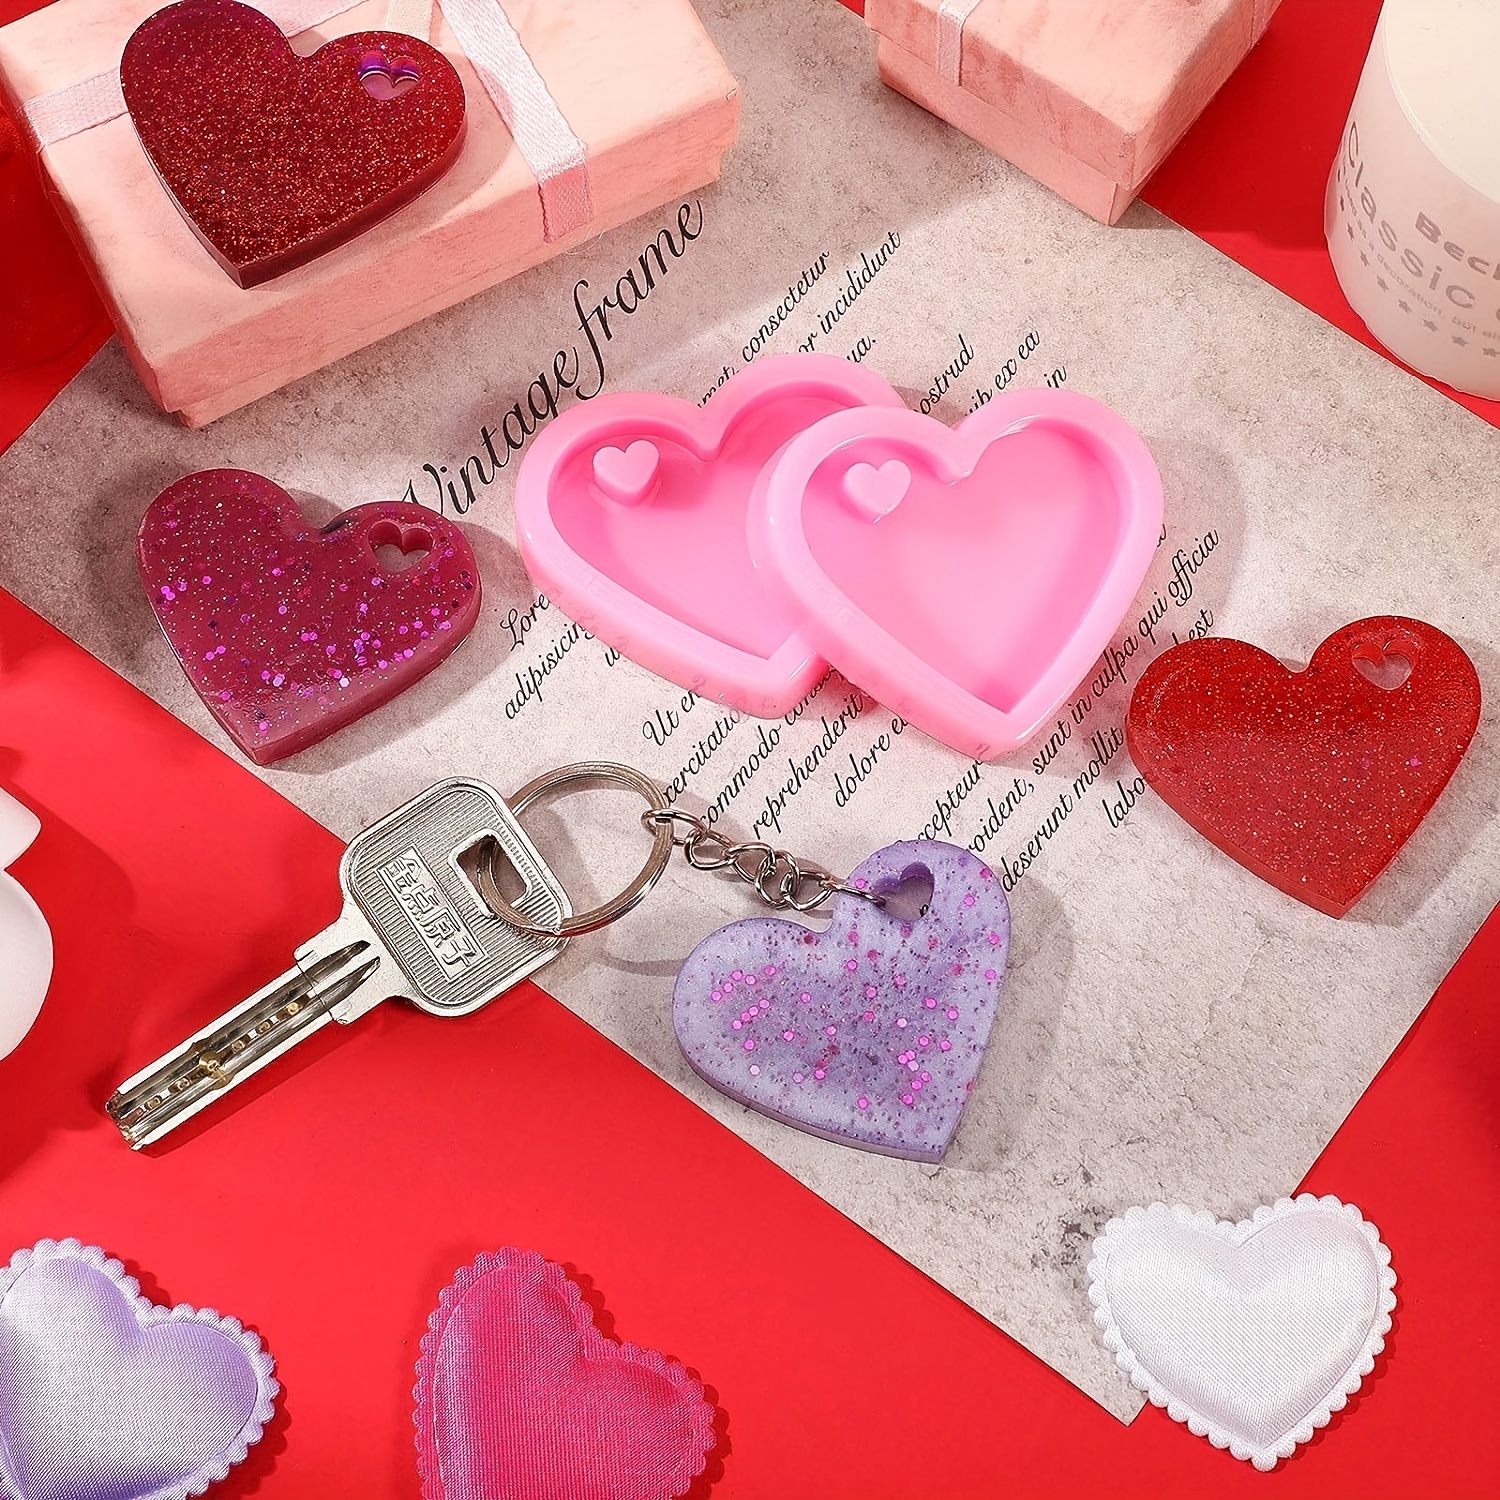 Hearts/Key Shaped Silicone Material Cake Mold Silicone Cupcake